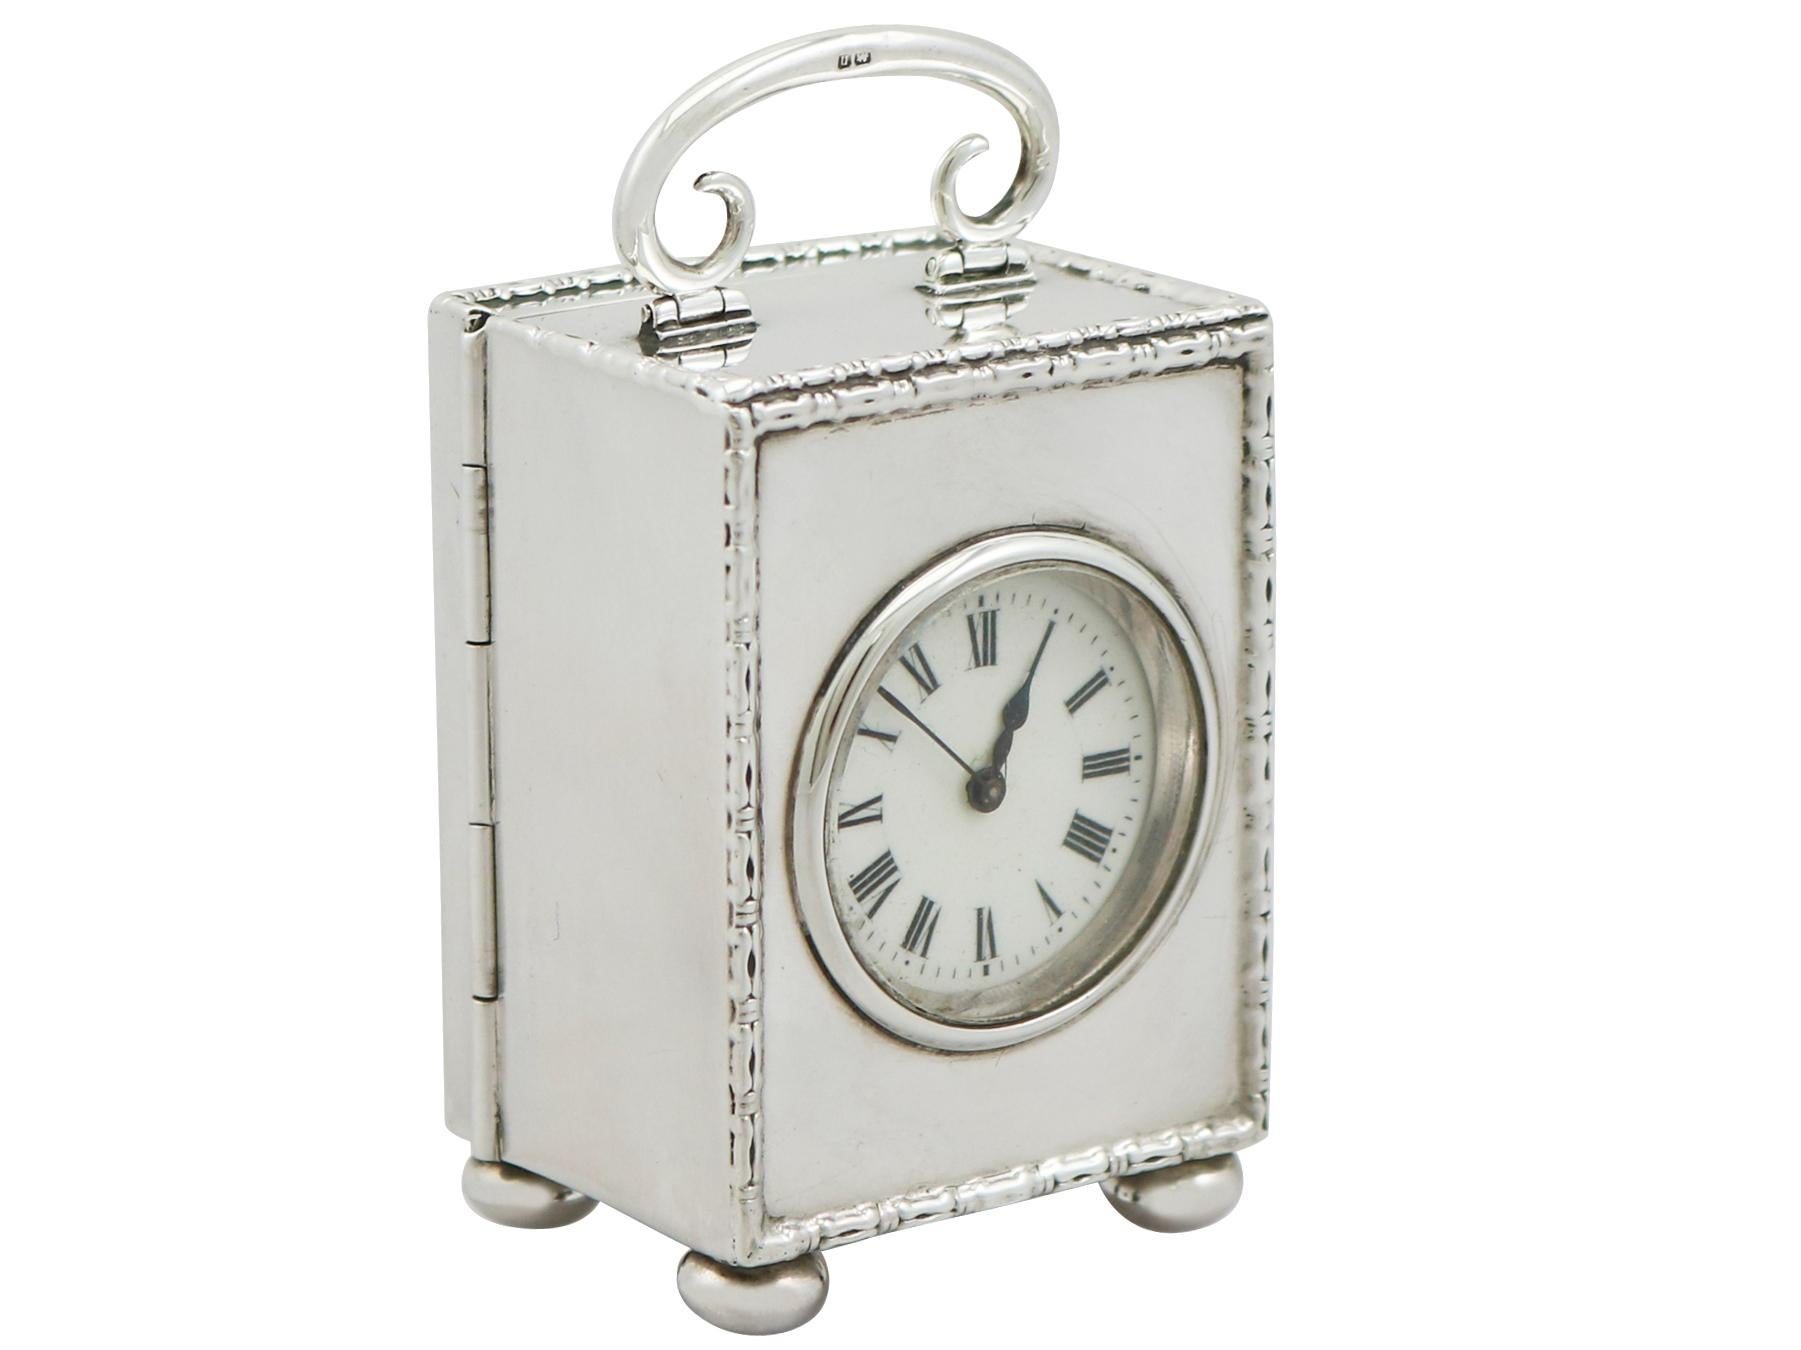 An exceptional, fine and impressive antique George V English sterling silver boudoir clock; part of our antique silver timepiece collection

This exceptional antique George V boudoir clock in sterling silver has a plain rectangular form onto four